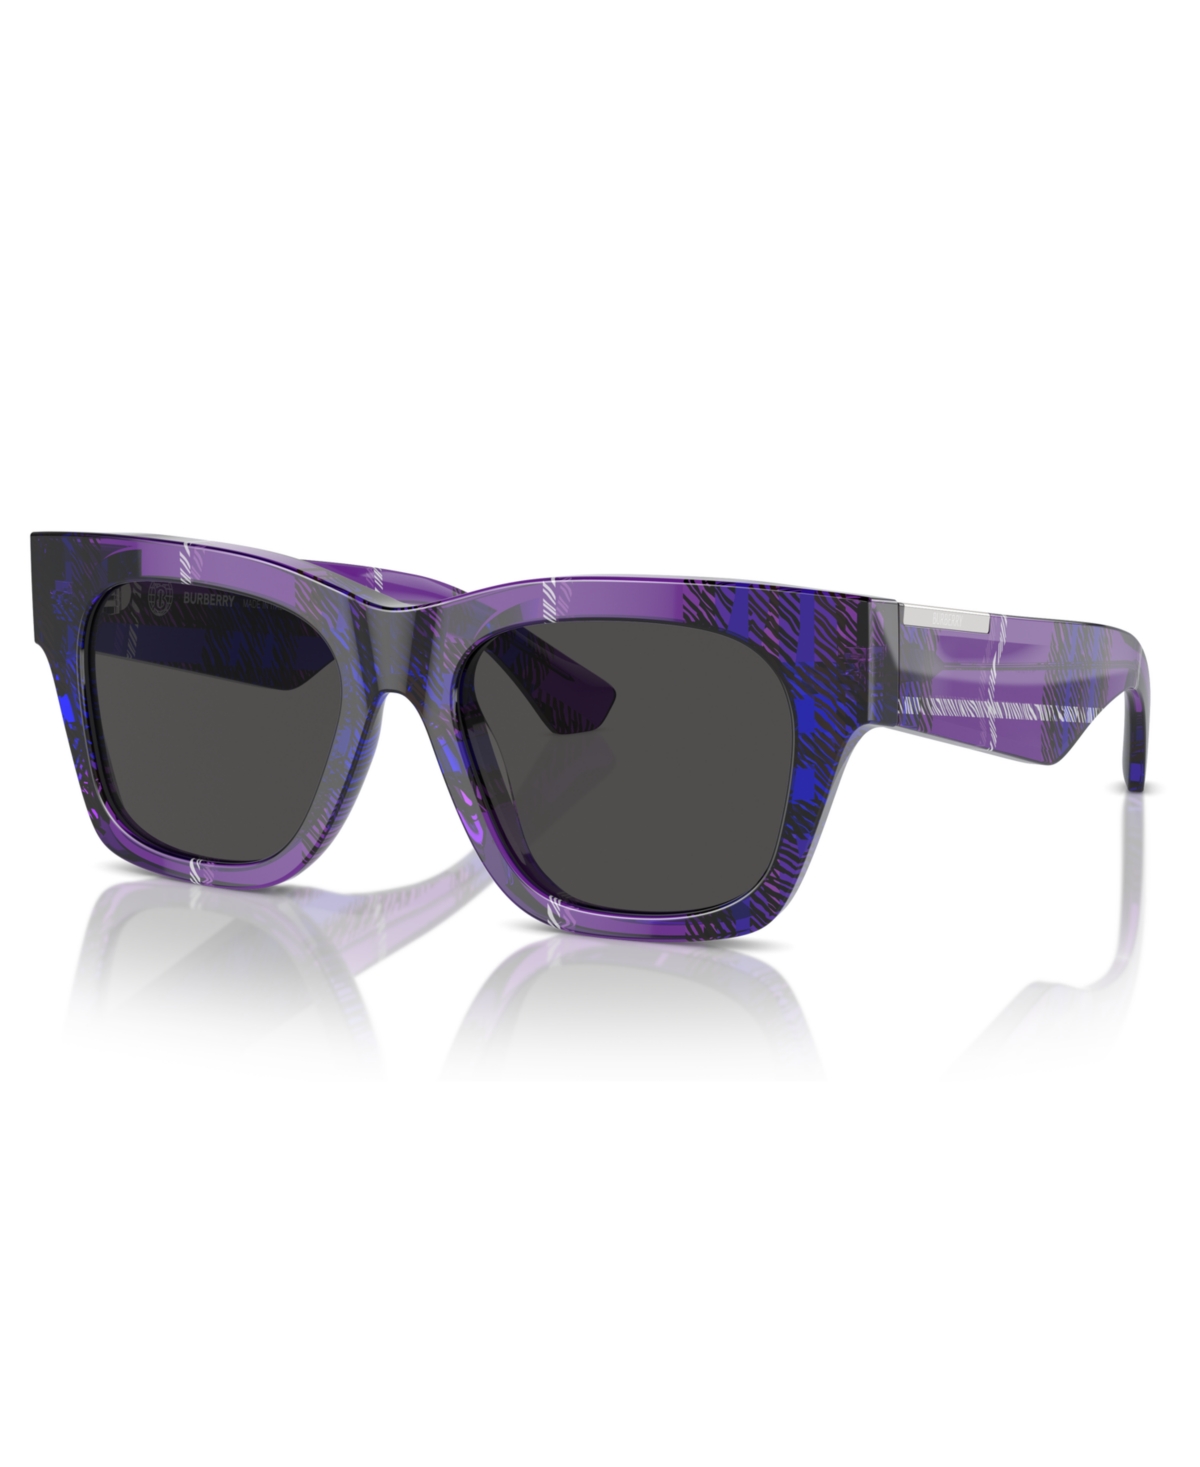 Burberry Women's Sunglasses, Be4424 In Check Violet